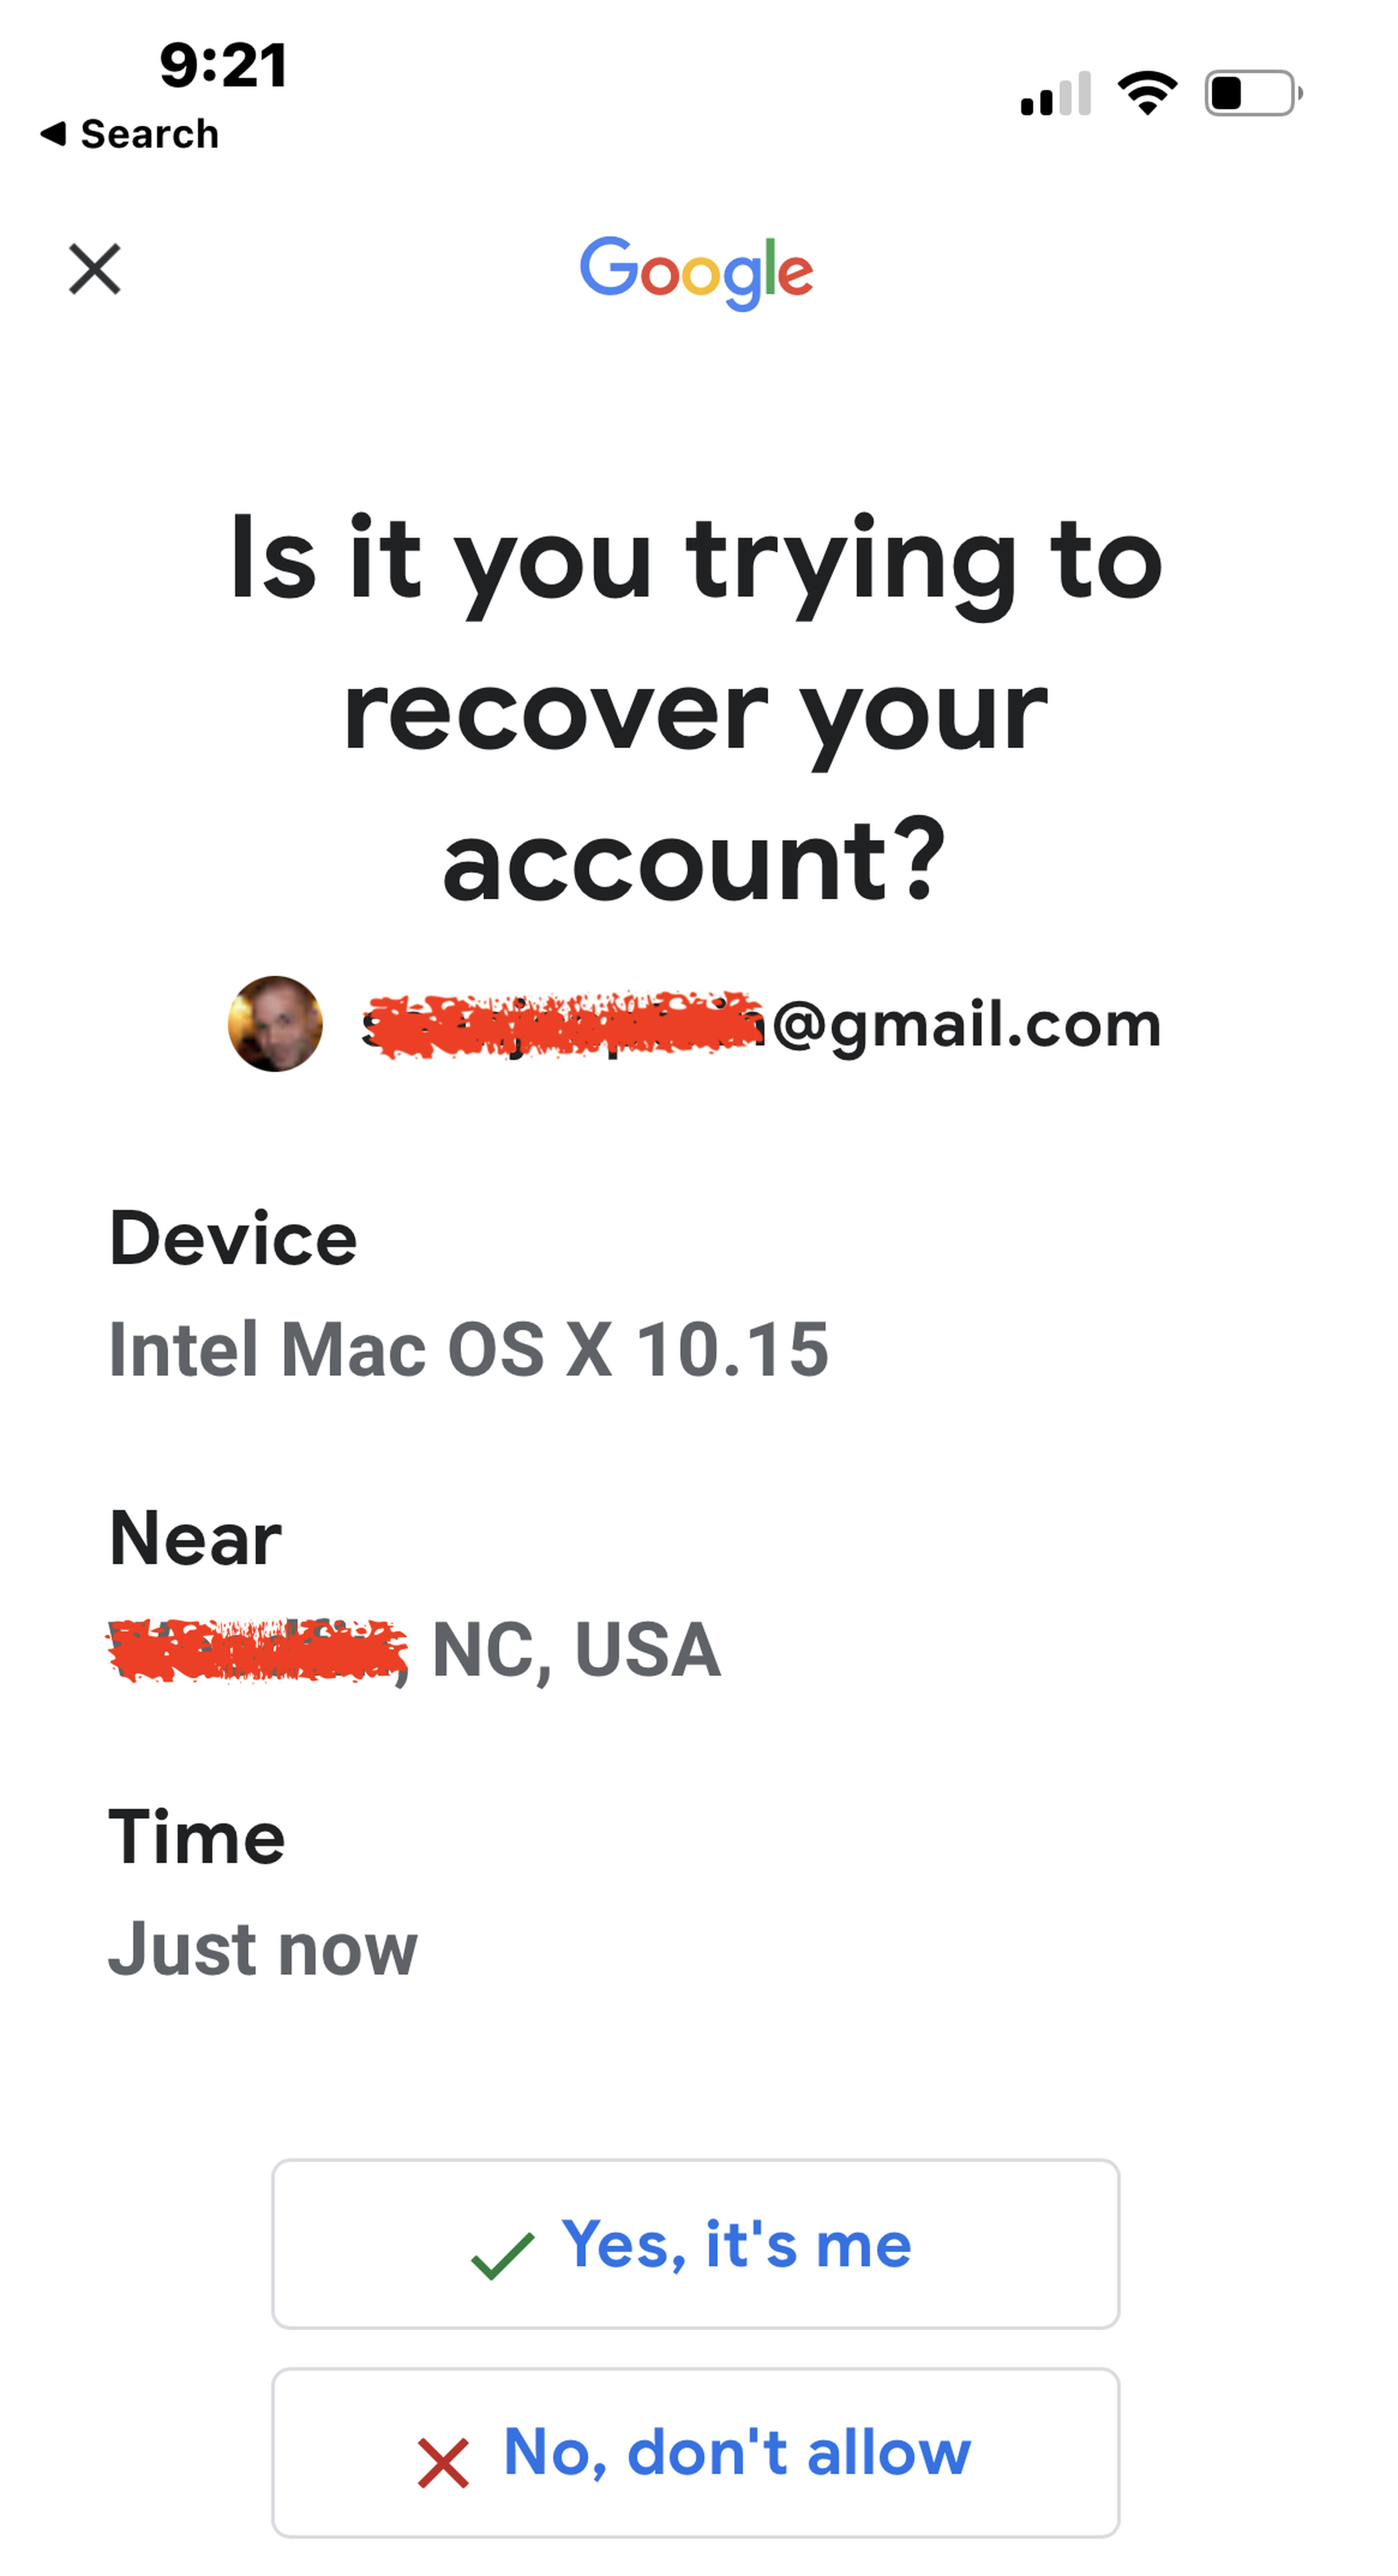 An alert, sent to a separate device, will help confirm the request is legitimate.